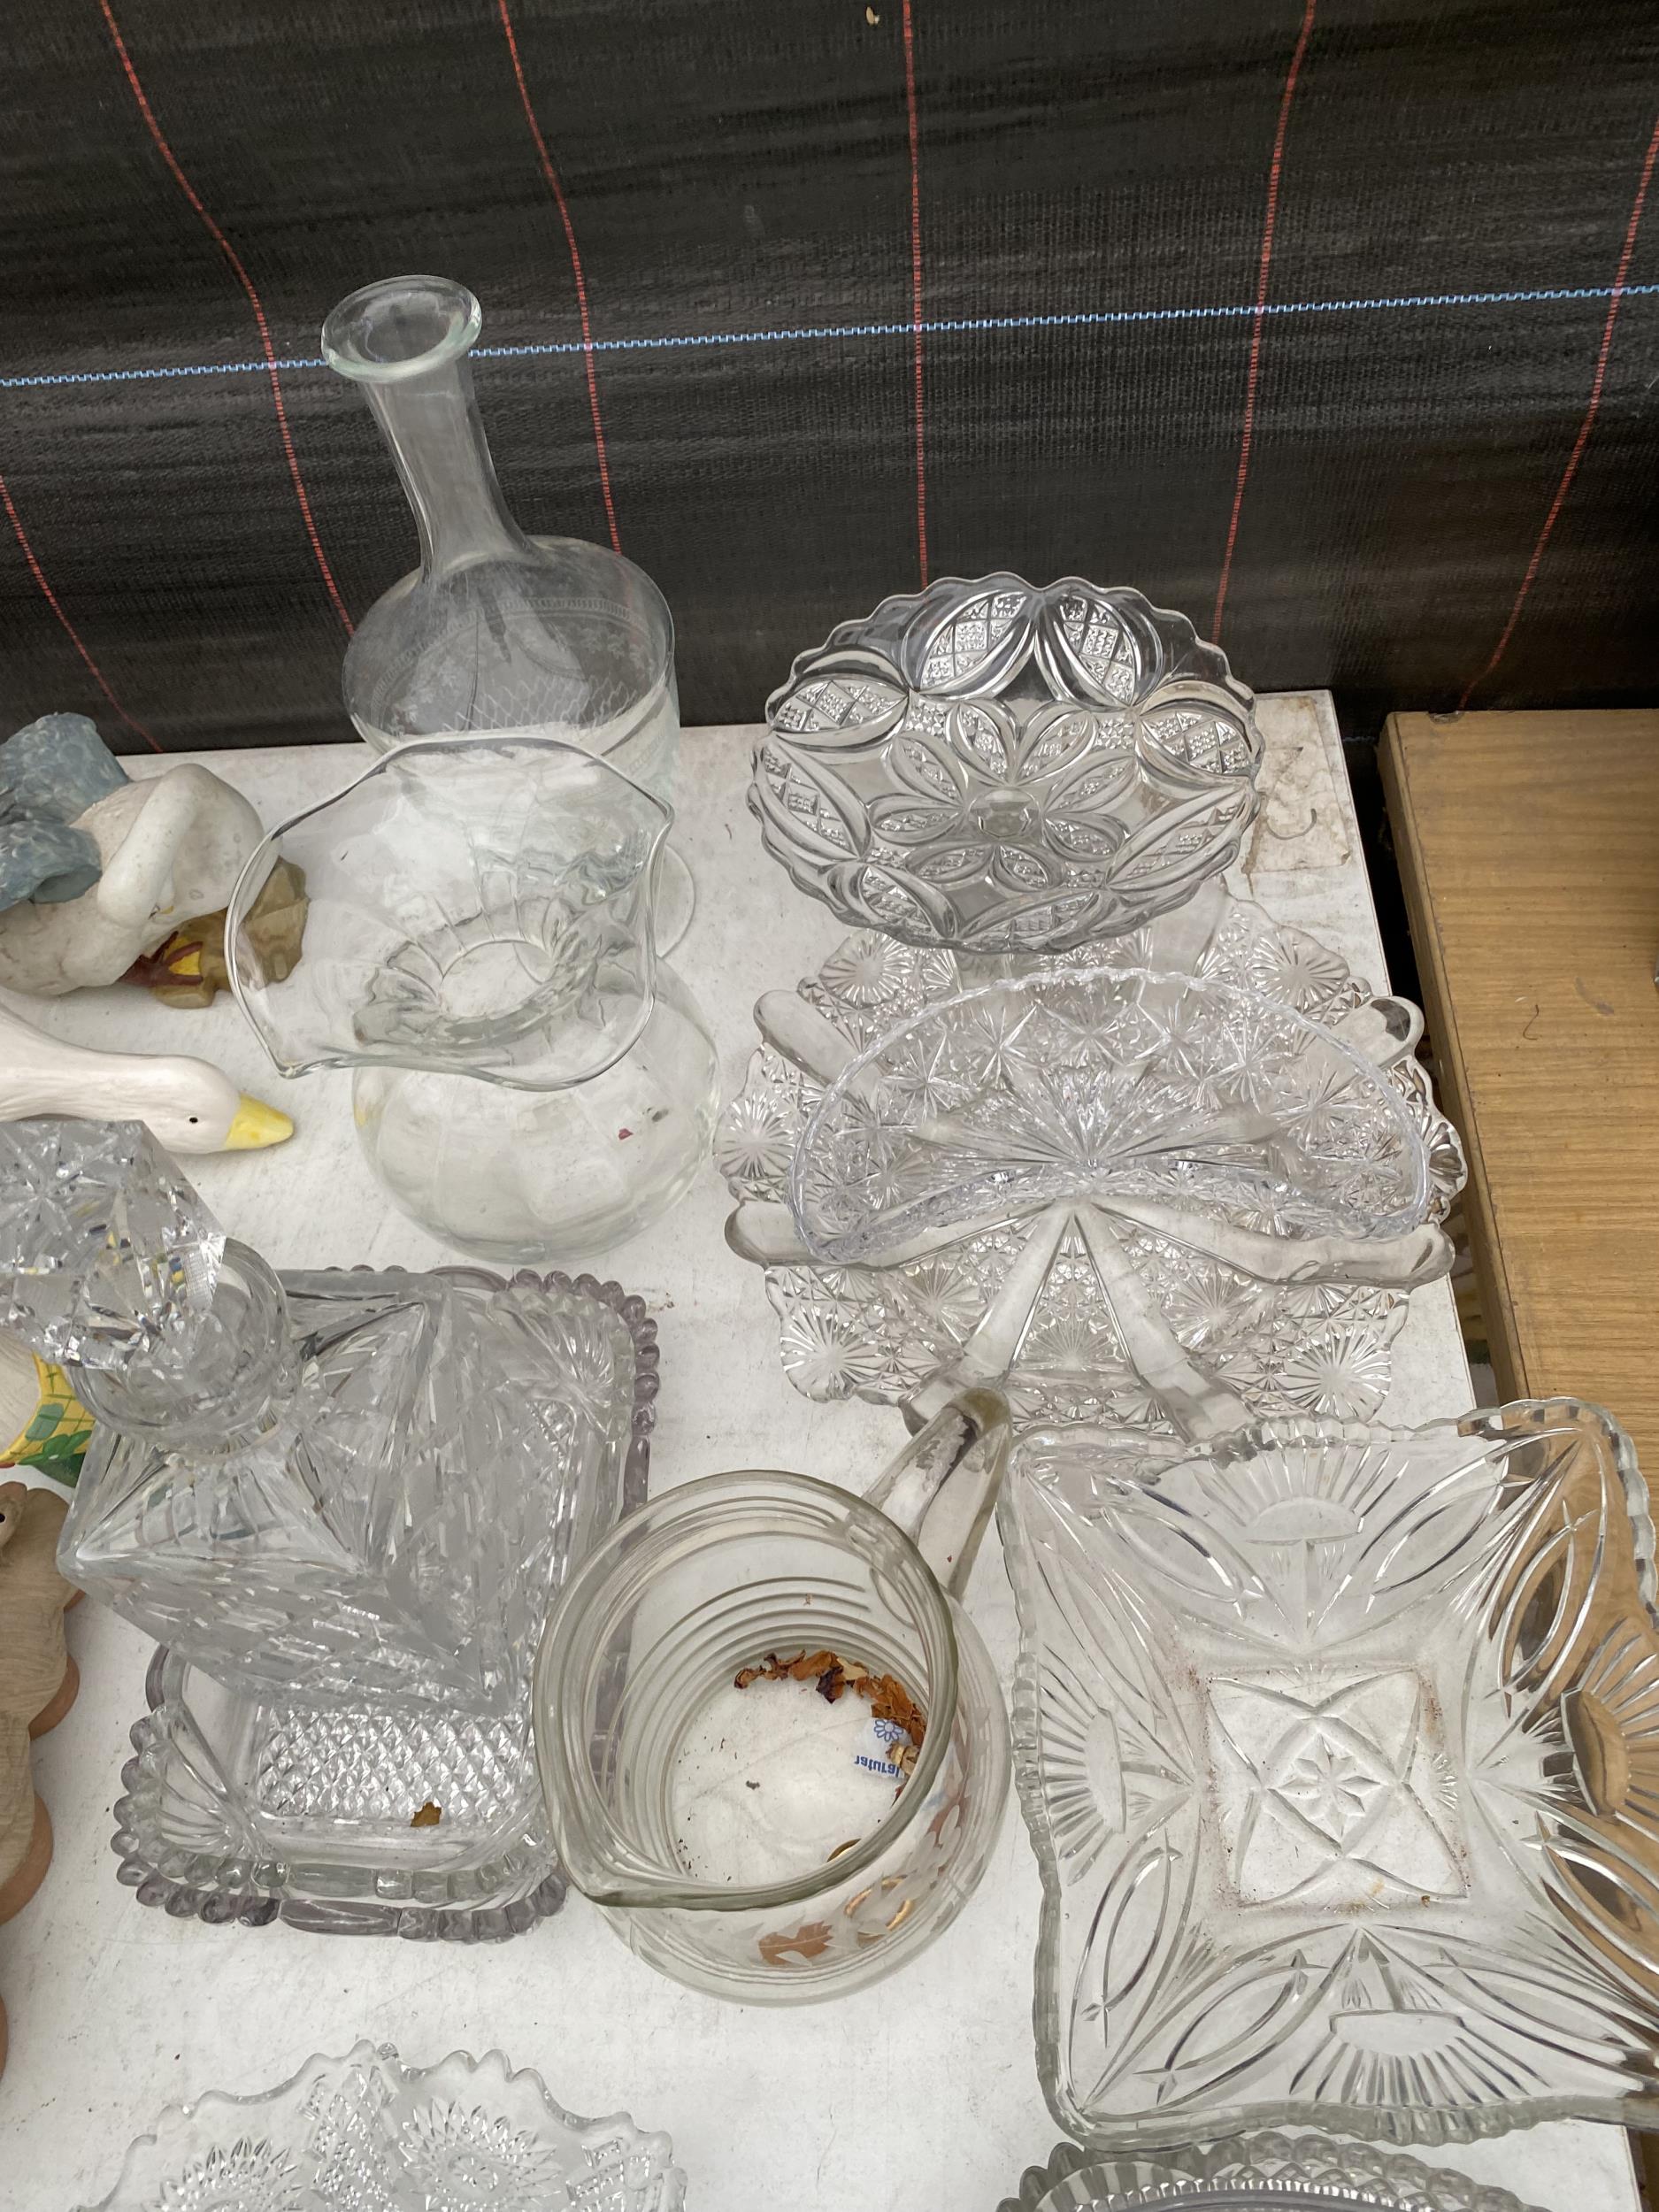 AN ASSORTMENT OF GLASS WARE TO INCLUDE A DECANTOR, BOWLS AND VASES ETC - Image 2 of 2